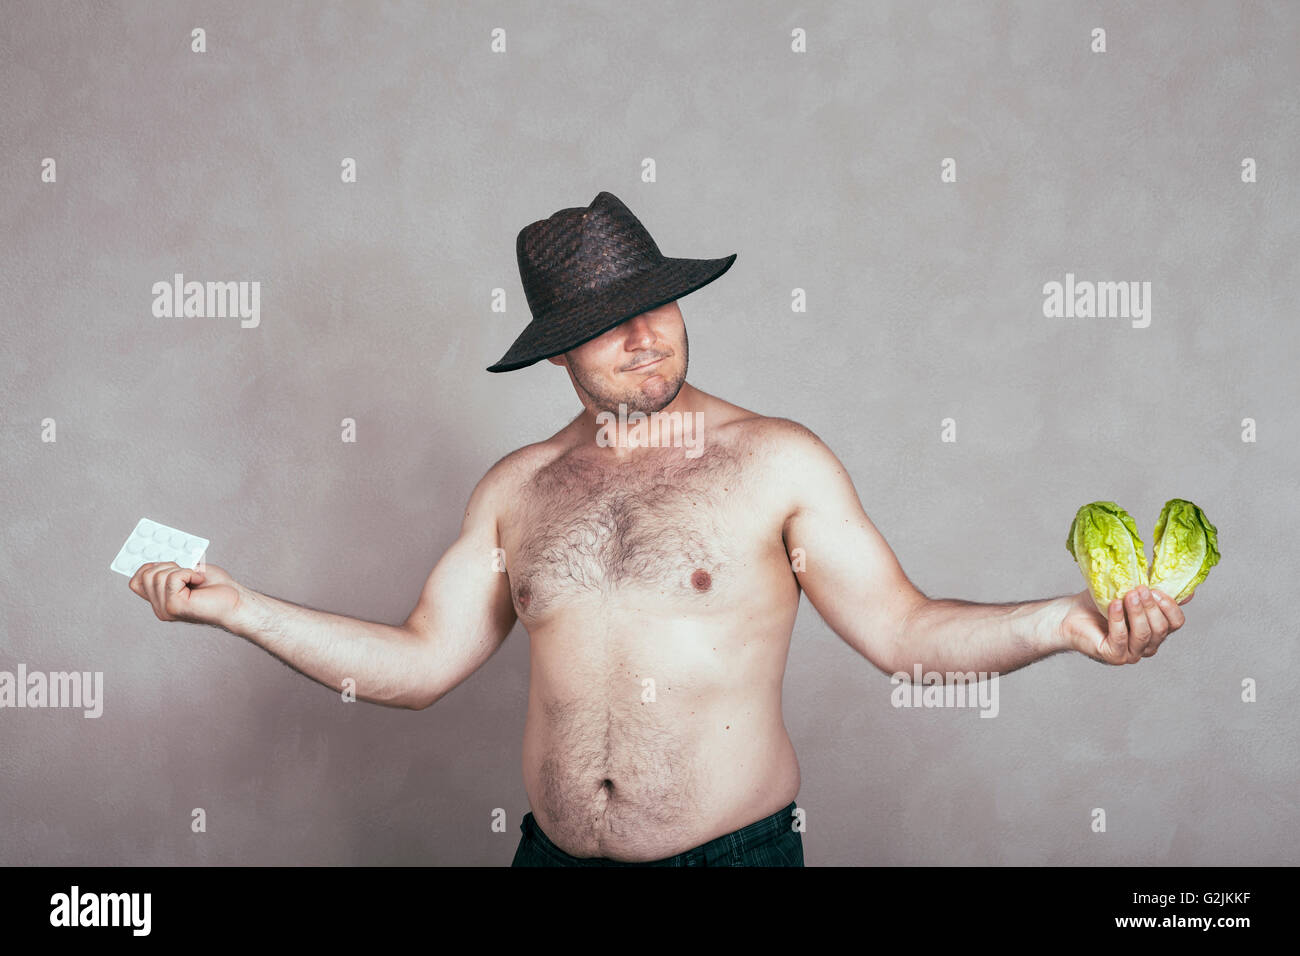 Indecisive naked corpulent man in hat holding pharmaceutical products and lettuce. Stock Photo